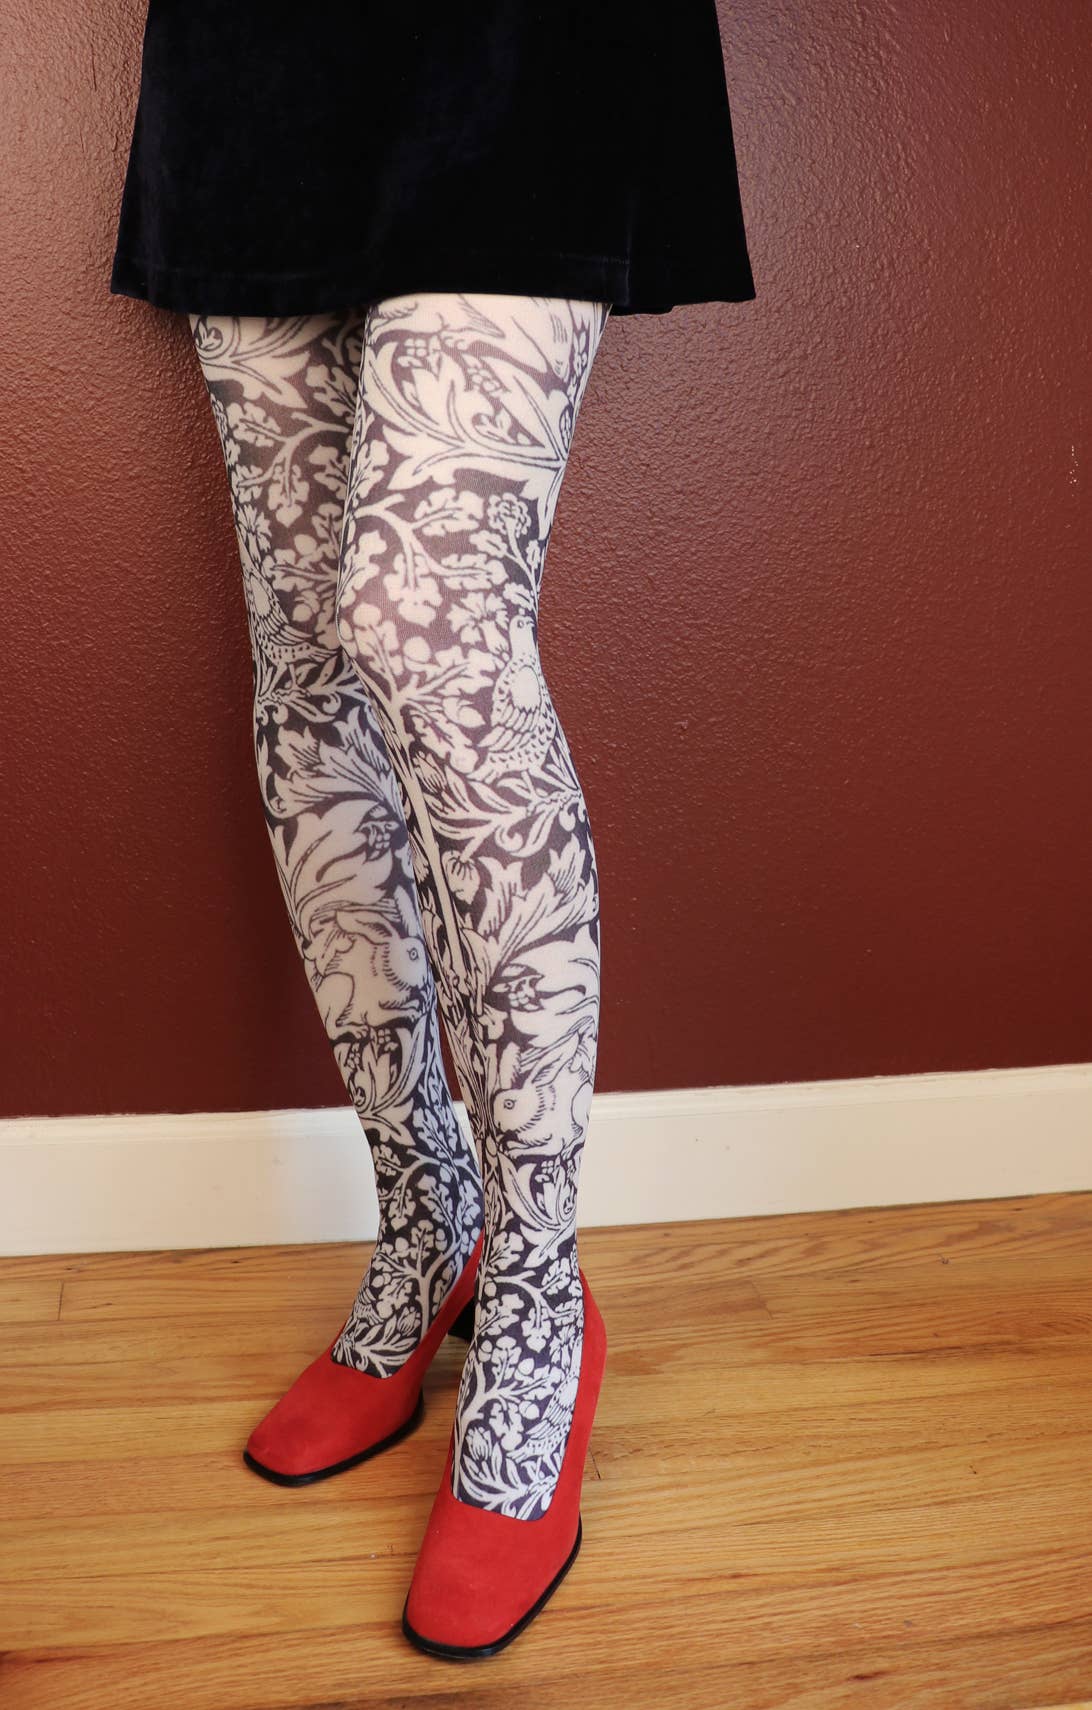 BRE'R BROTHER RABBIT by WILLIAM MORRIS Printed Art Tights